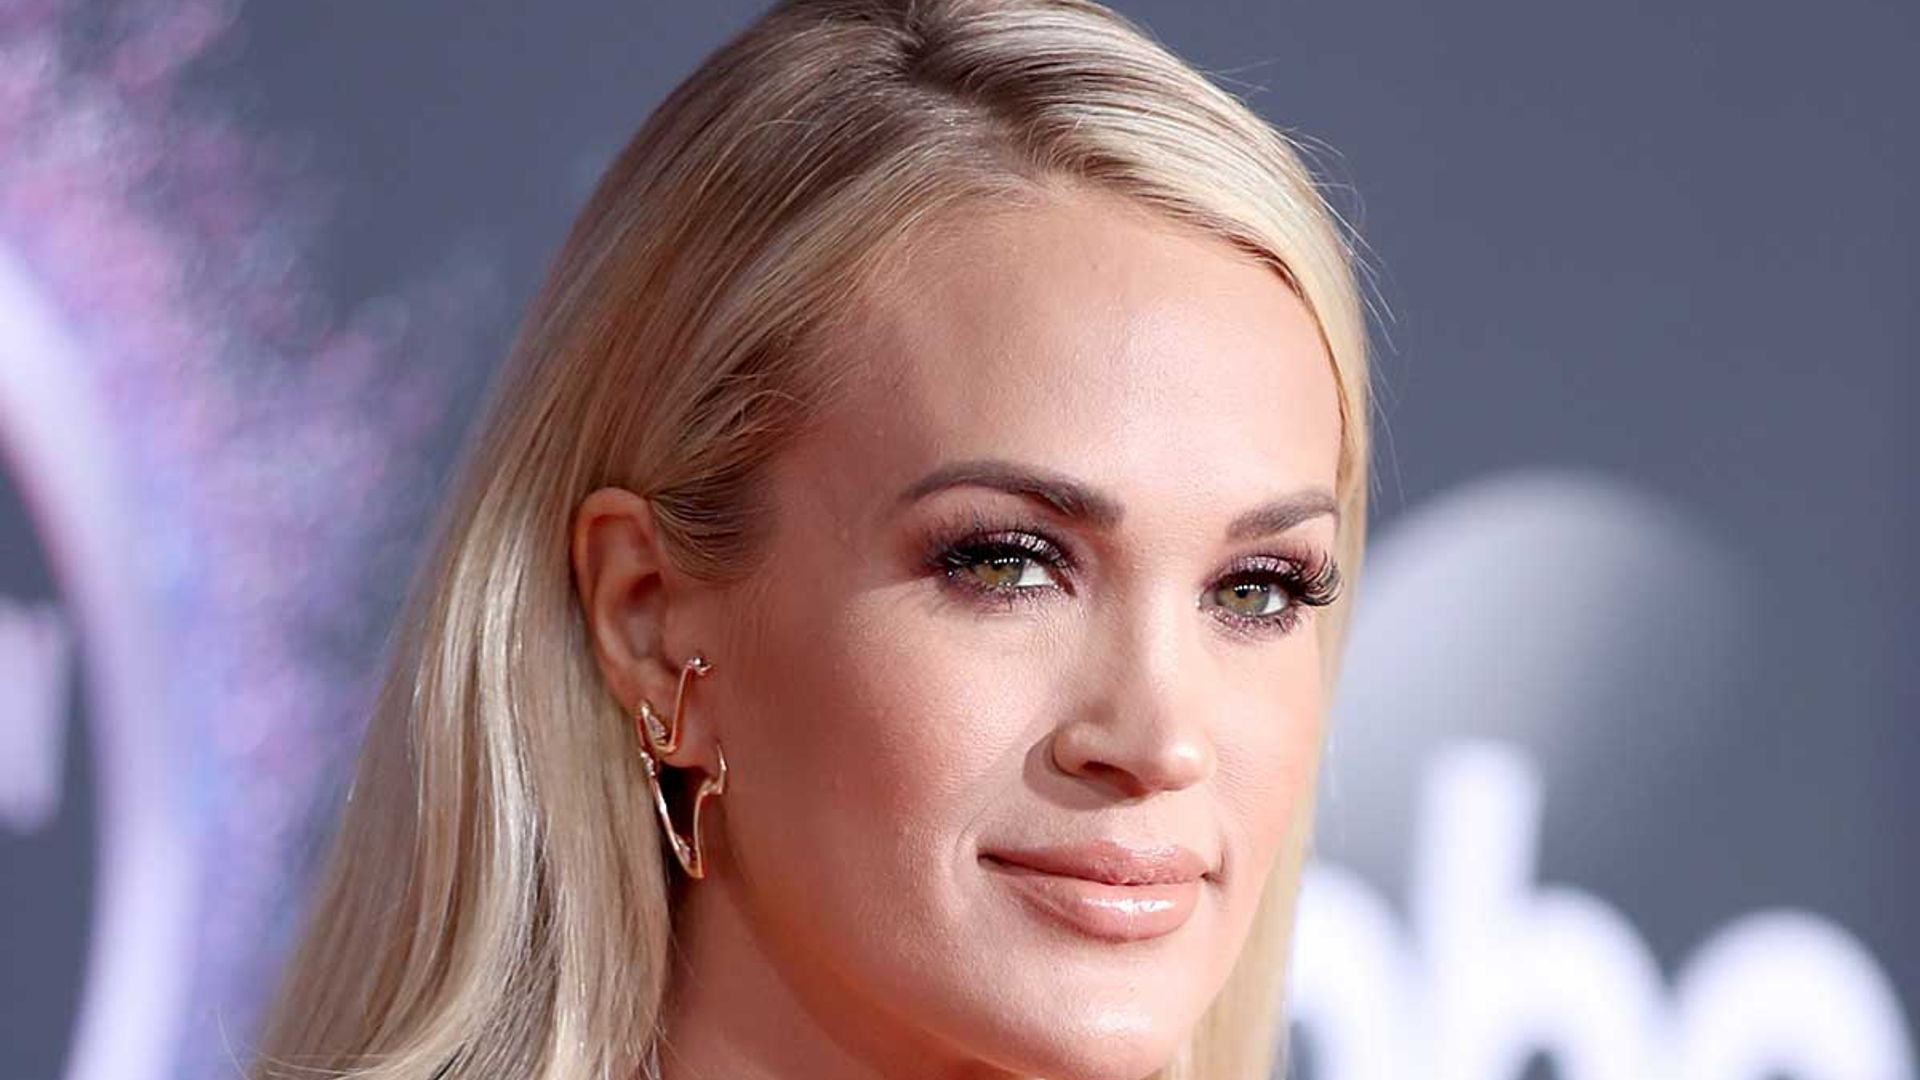 Carrie Underwood's killer look in new tour photos will leave you